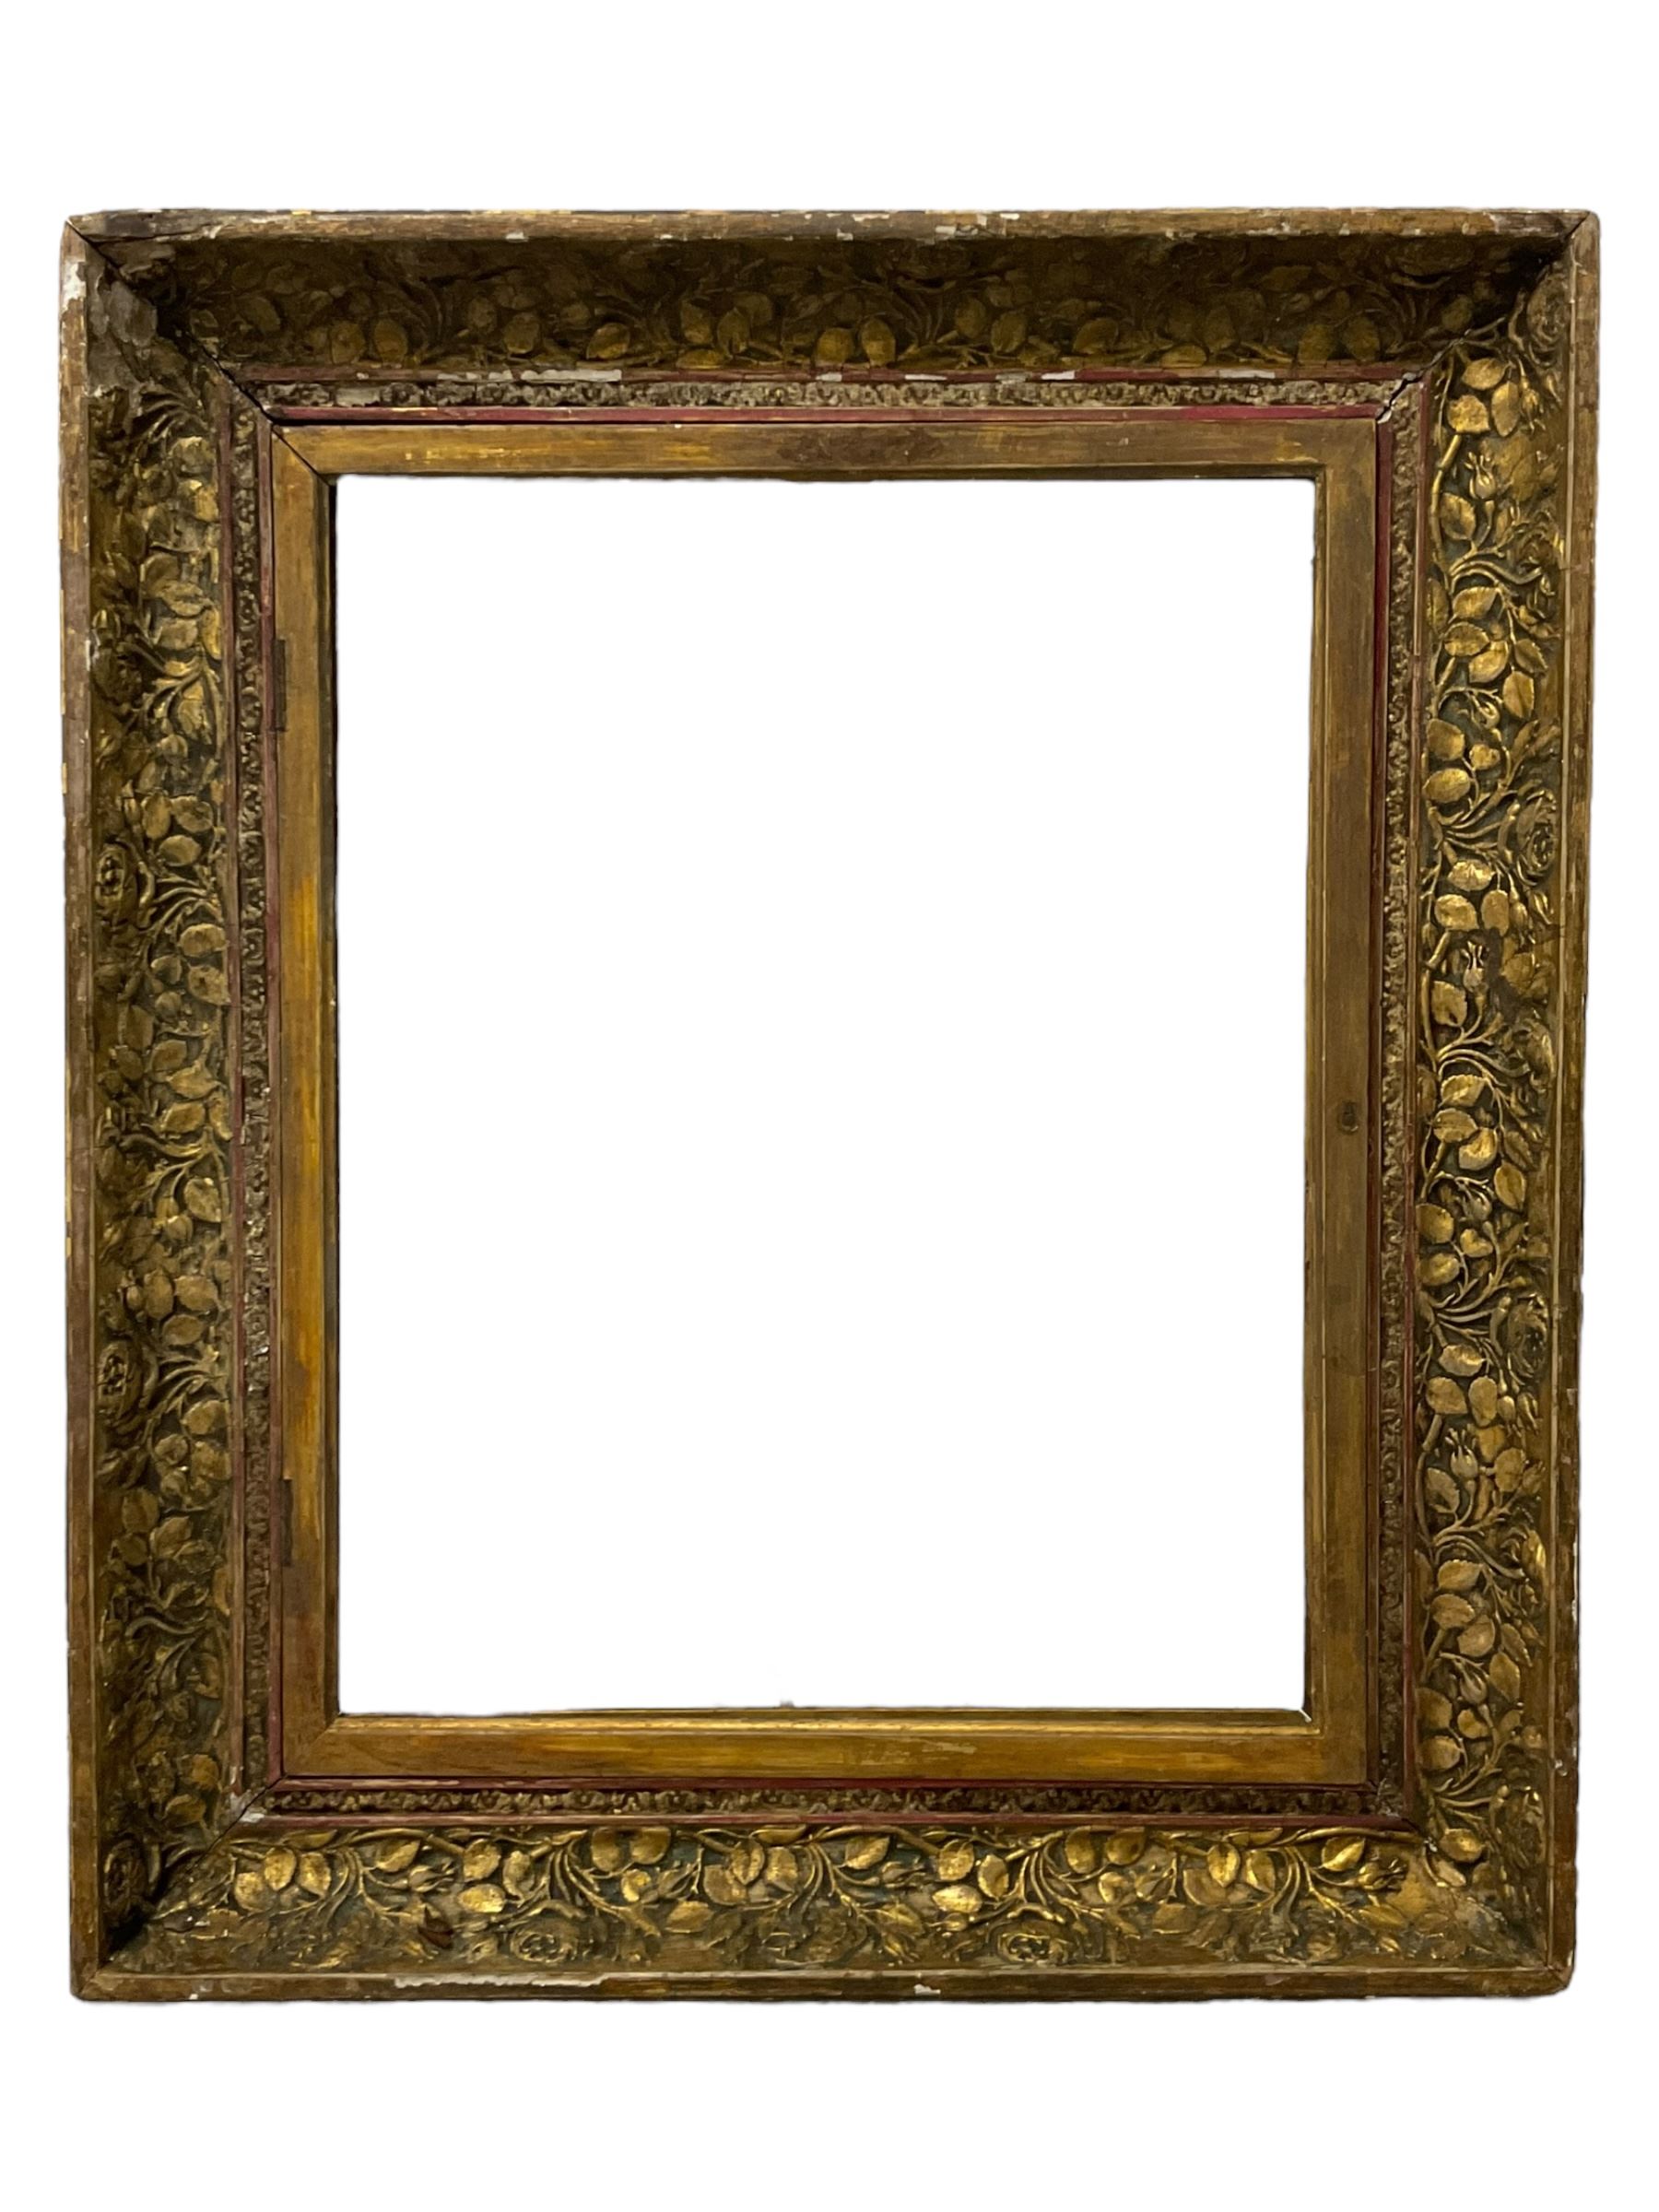 19th century giltwood and gesso frame - Image 4 of 6